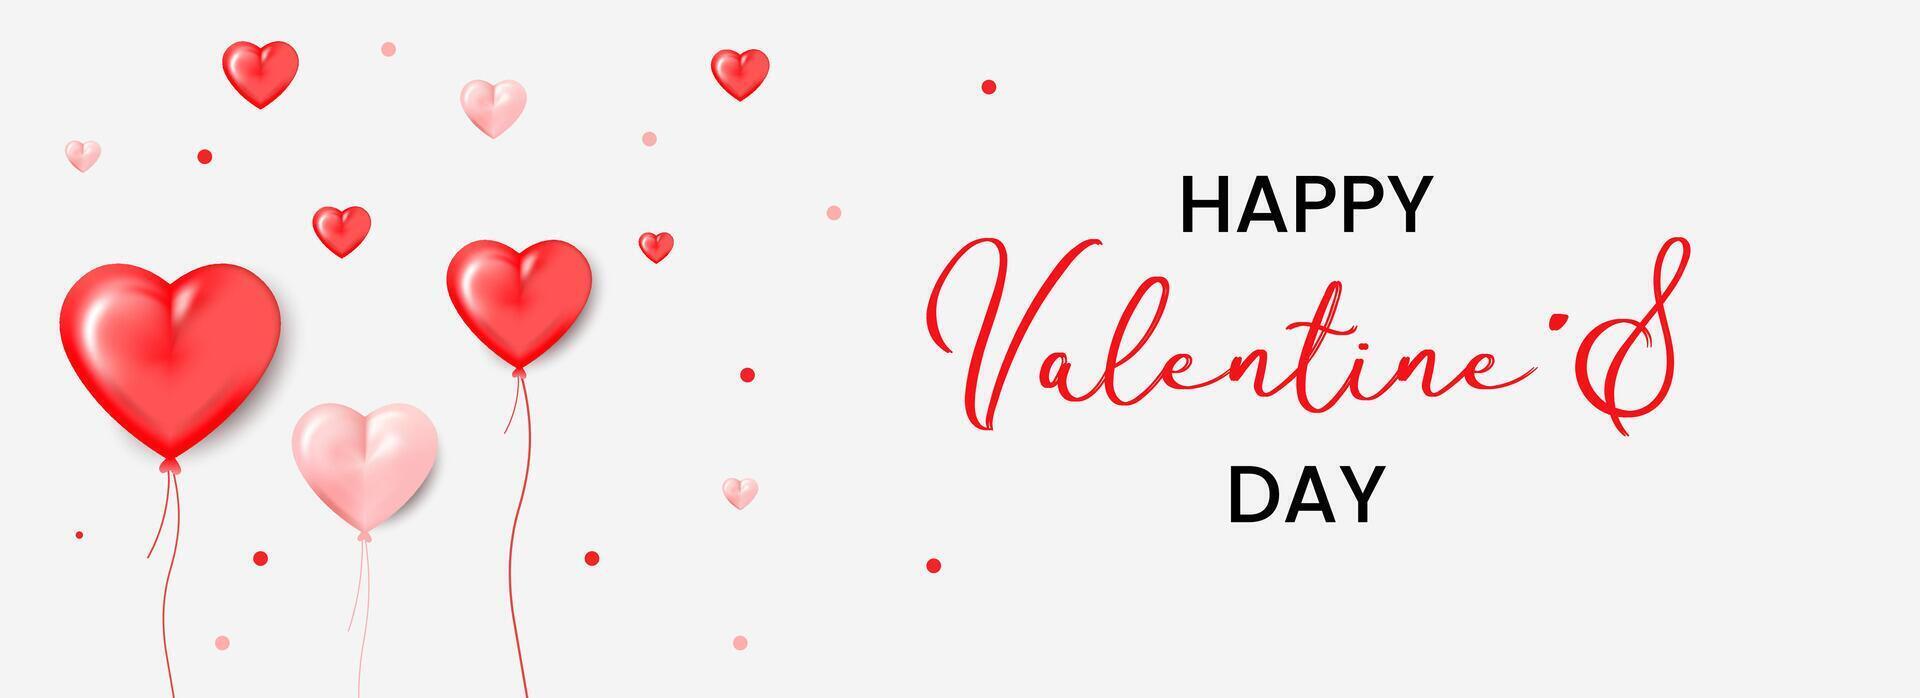 Happy Valentines Day banner with 3d creative love red and pink heart balloons on white background. vector